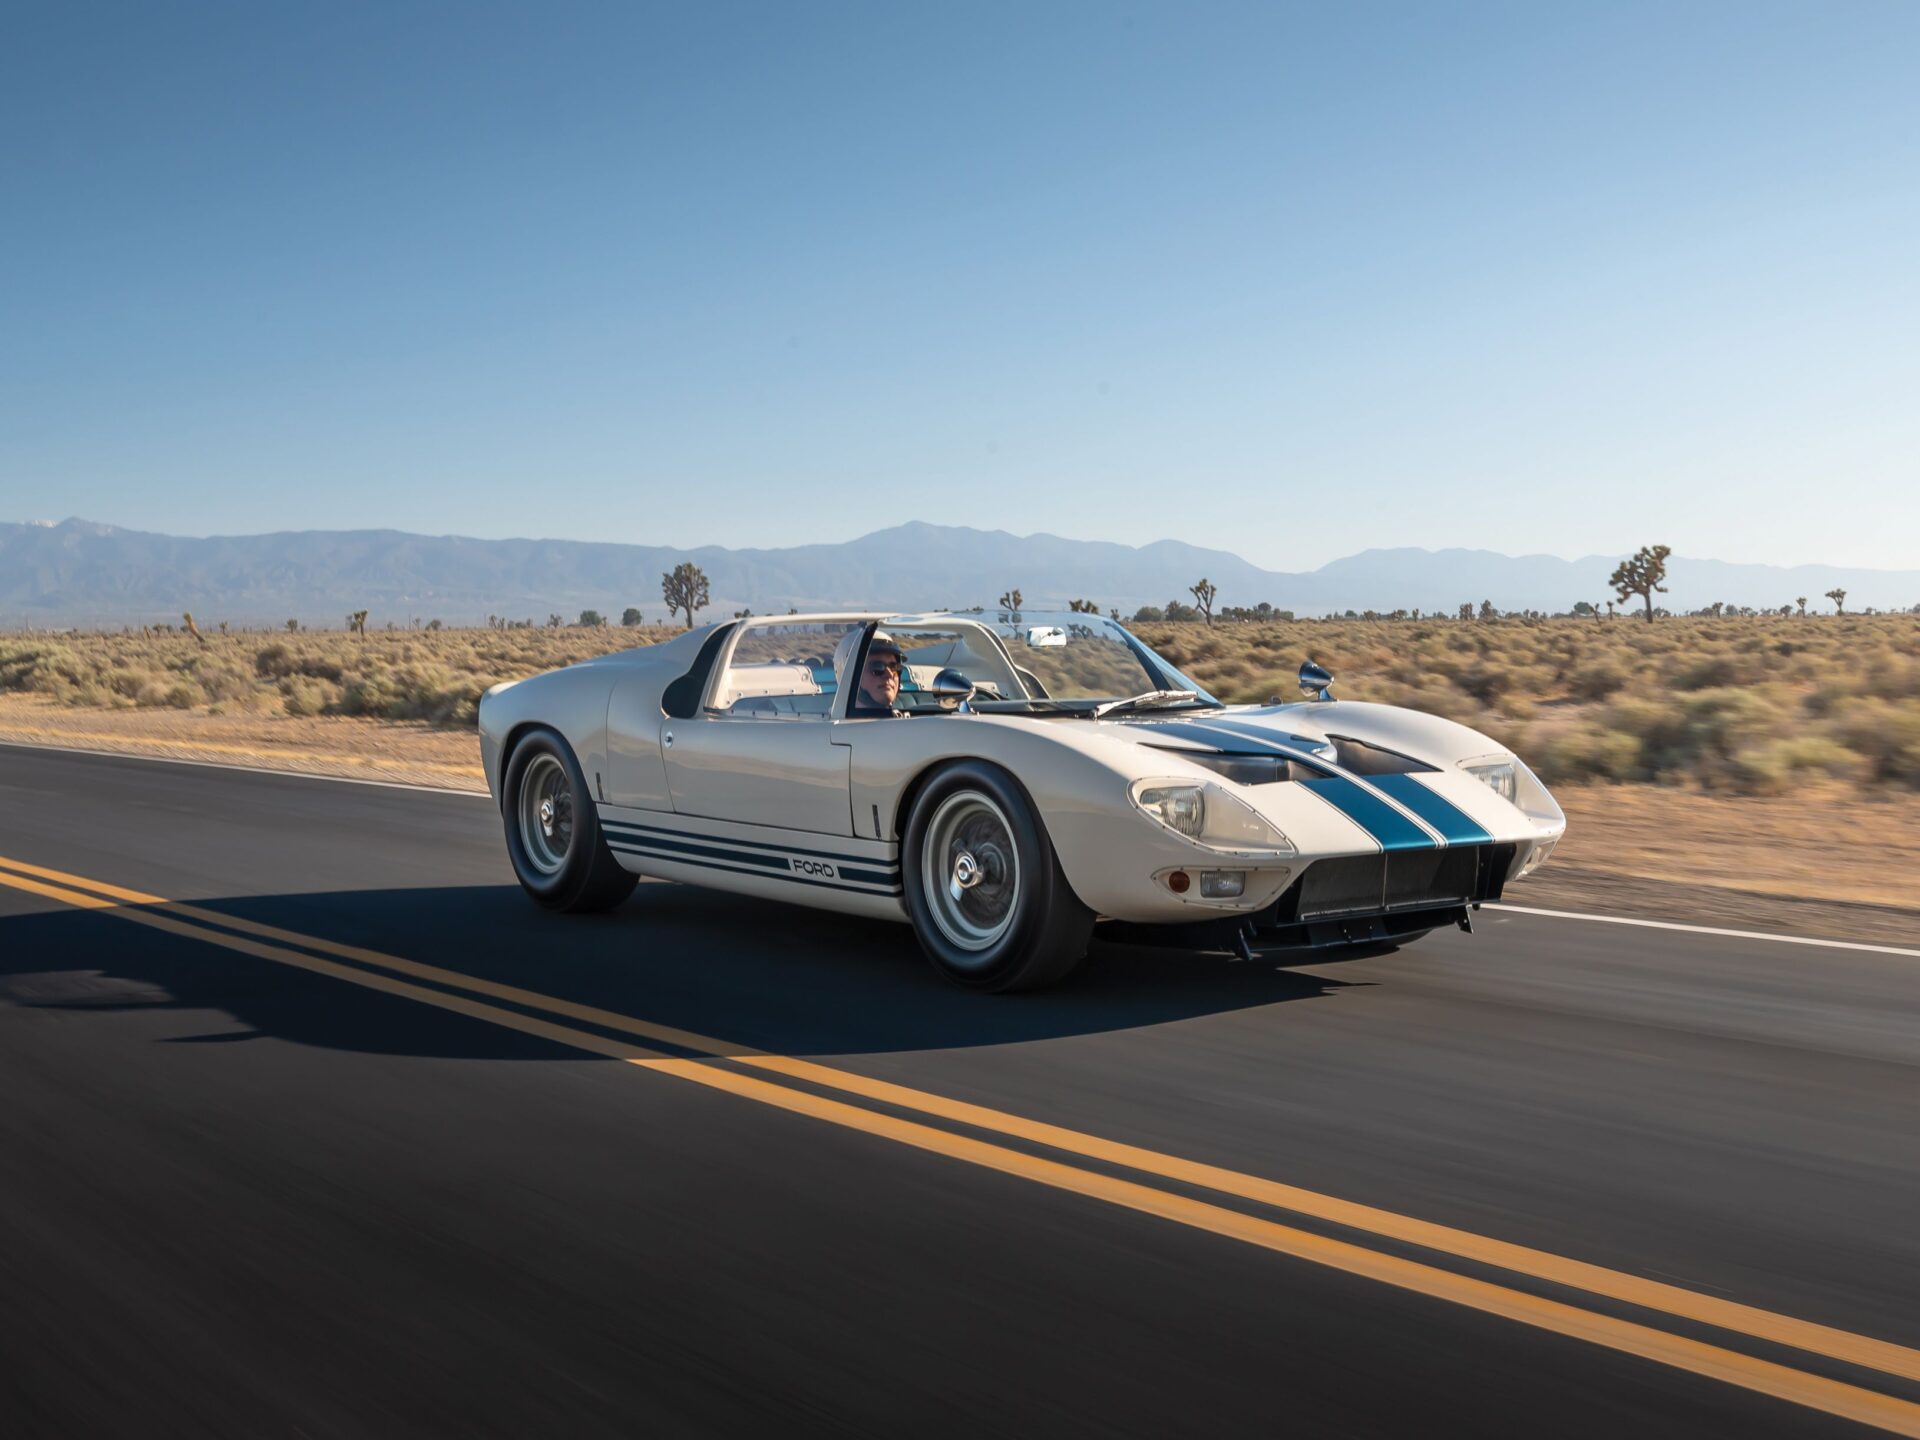 54 Years after We Drove This Ford GT40 Roadster, It's Being Auctioned for Millions